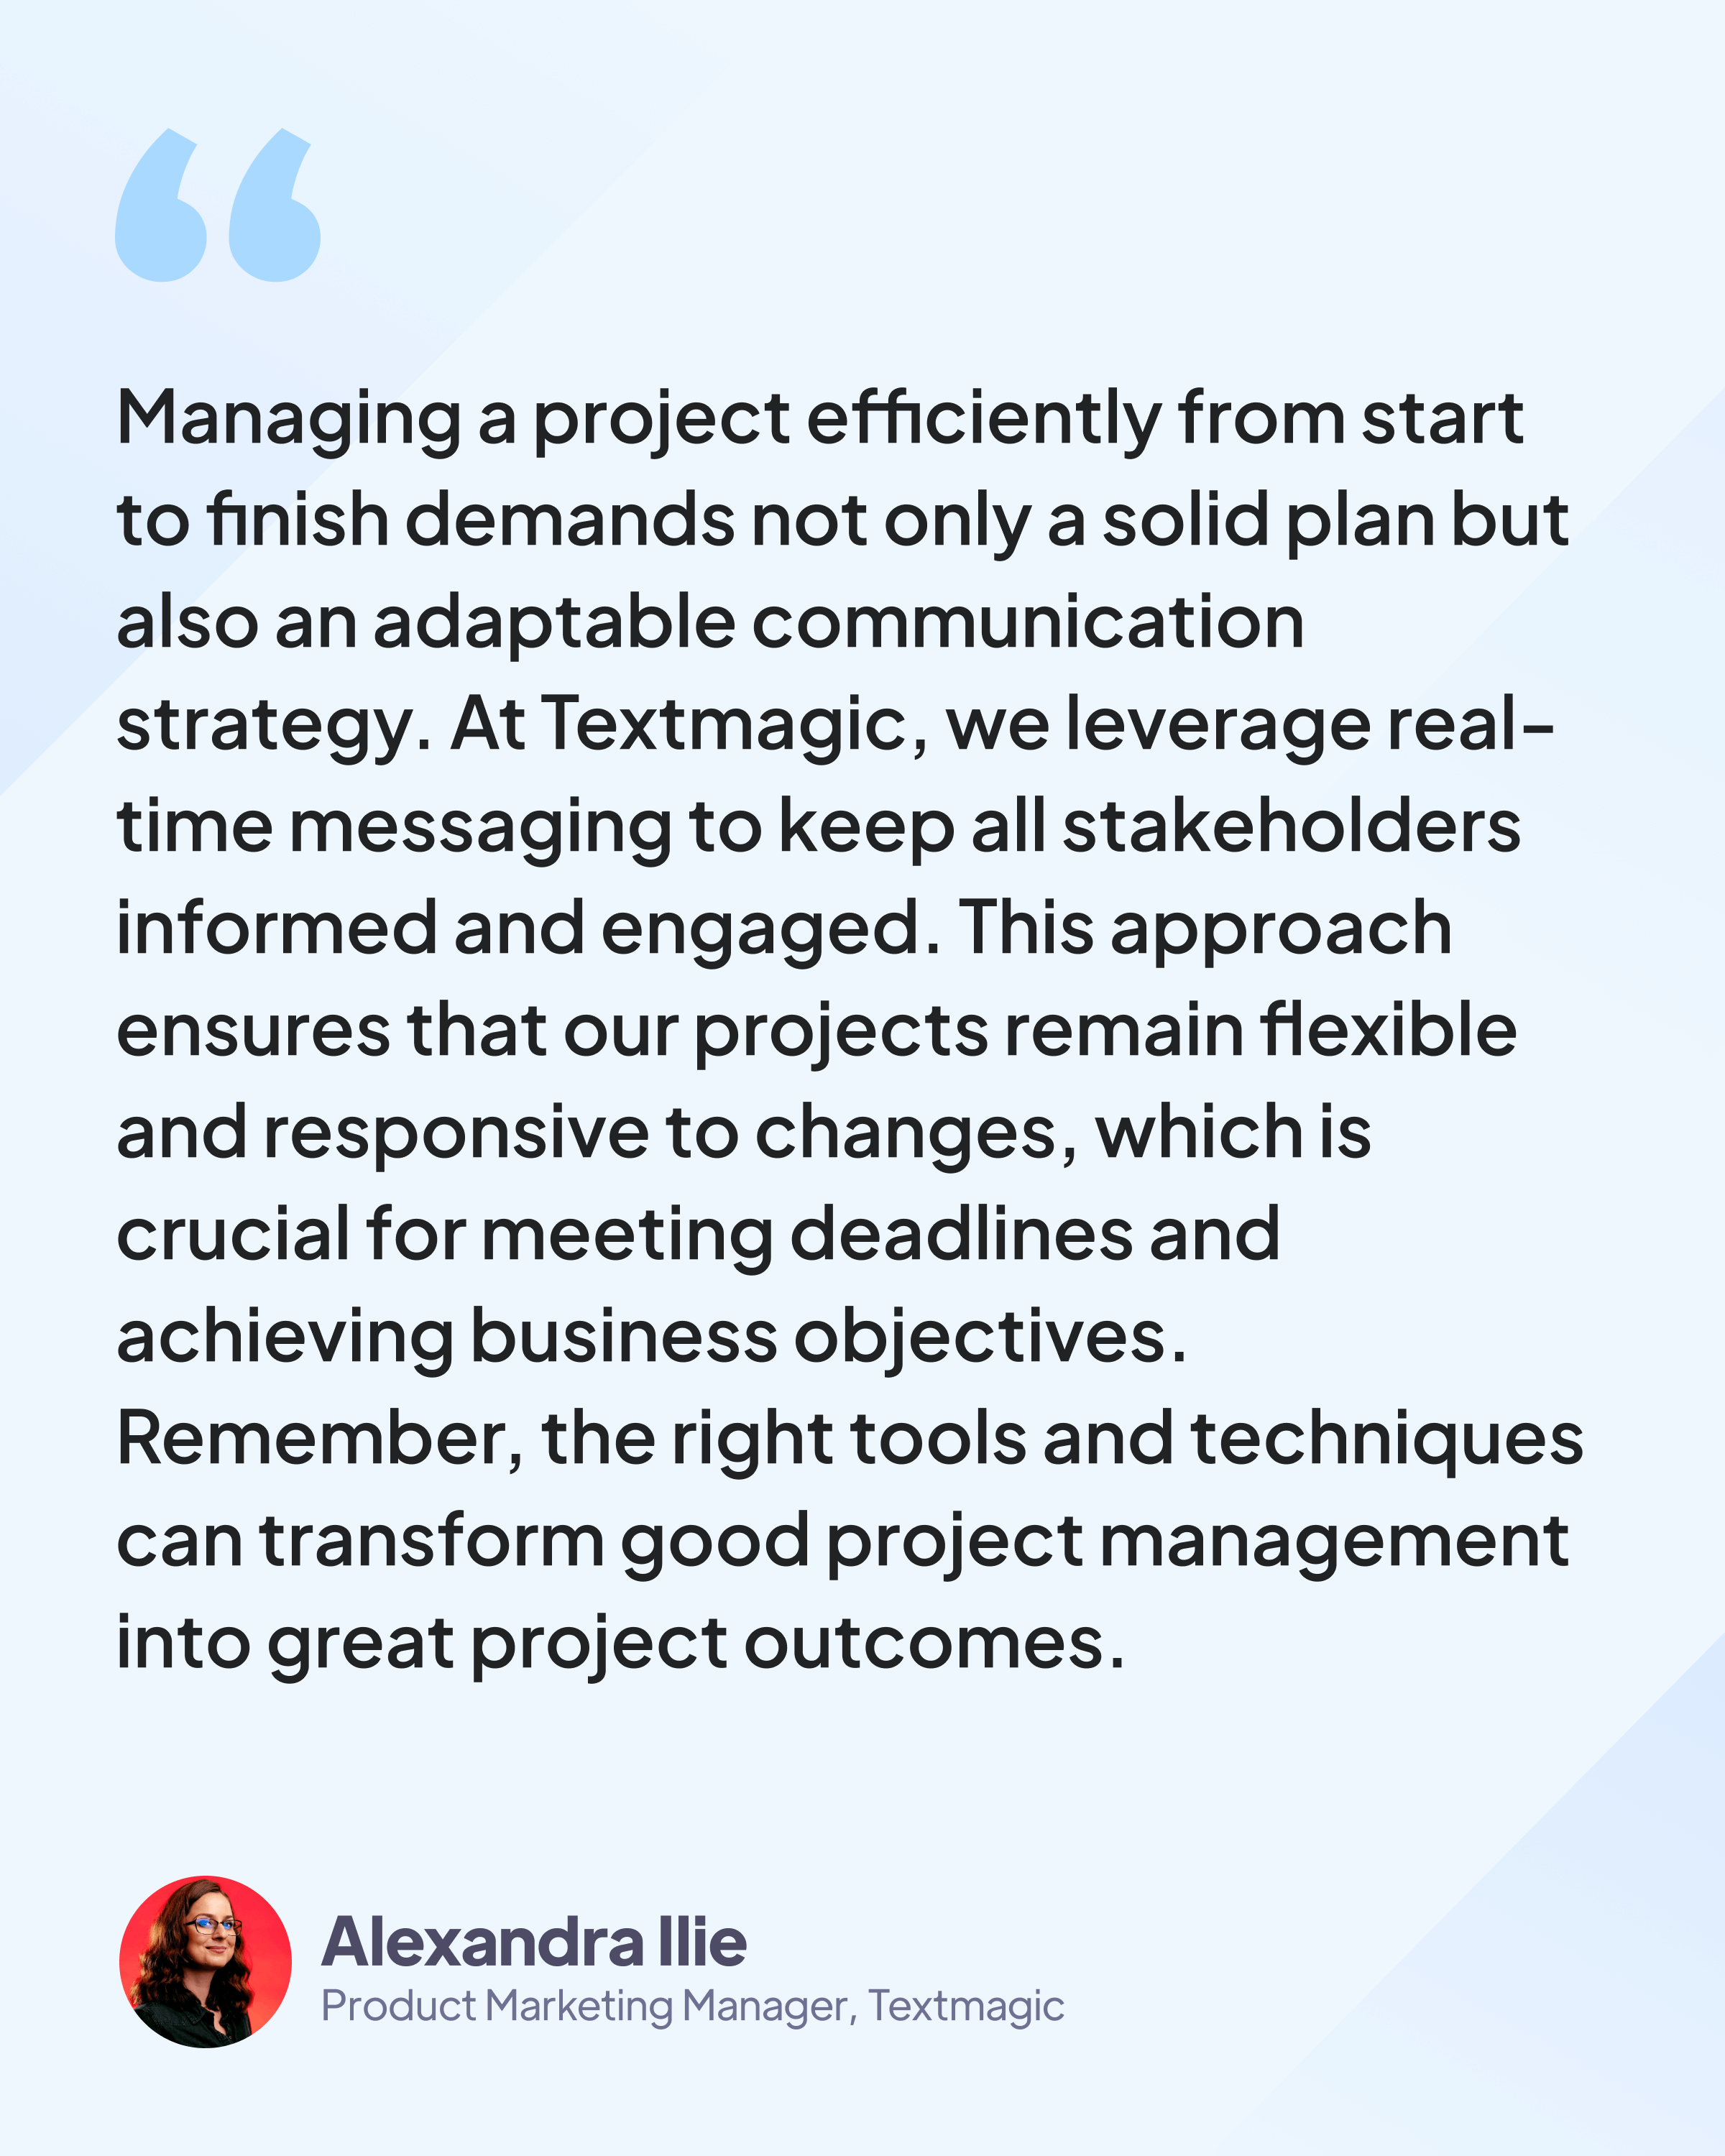 Quote about project management from Textmagic PMM Alexandra Ilie